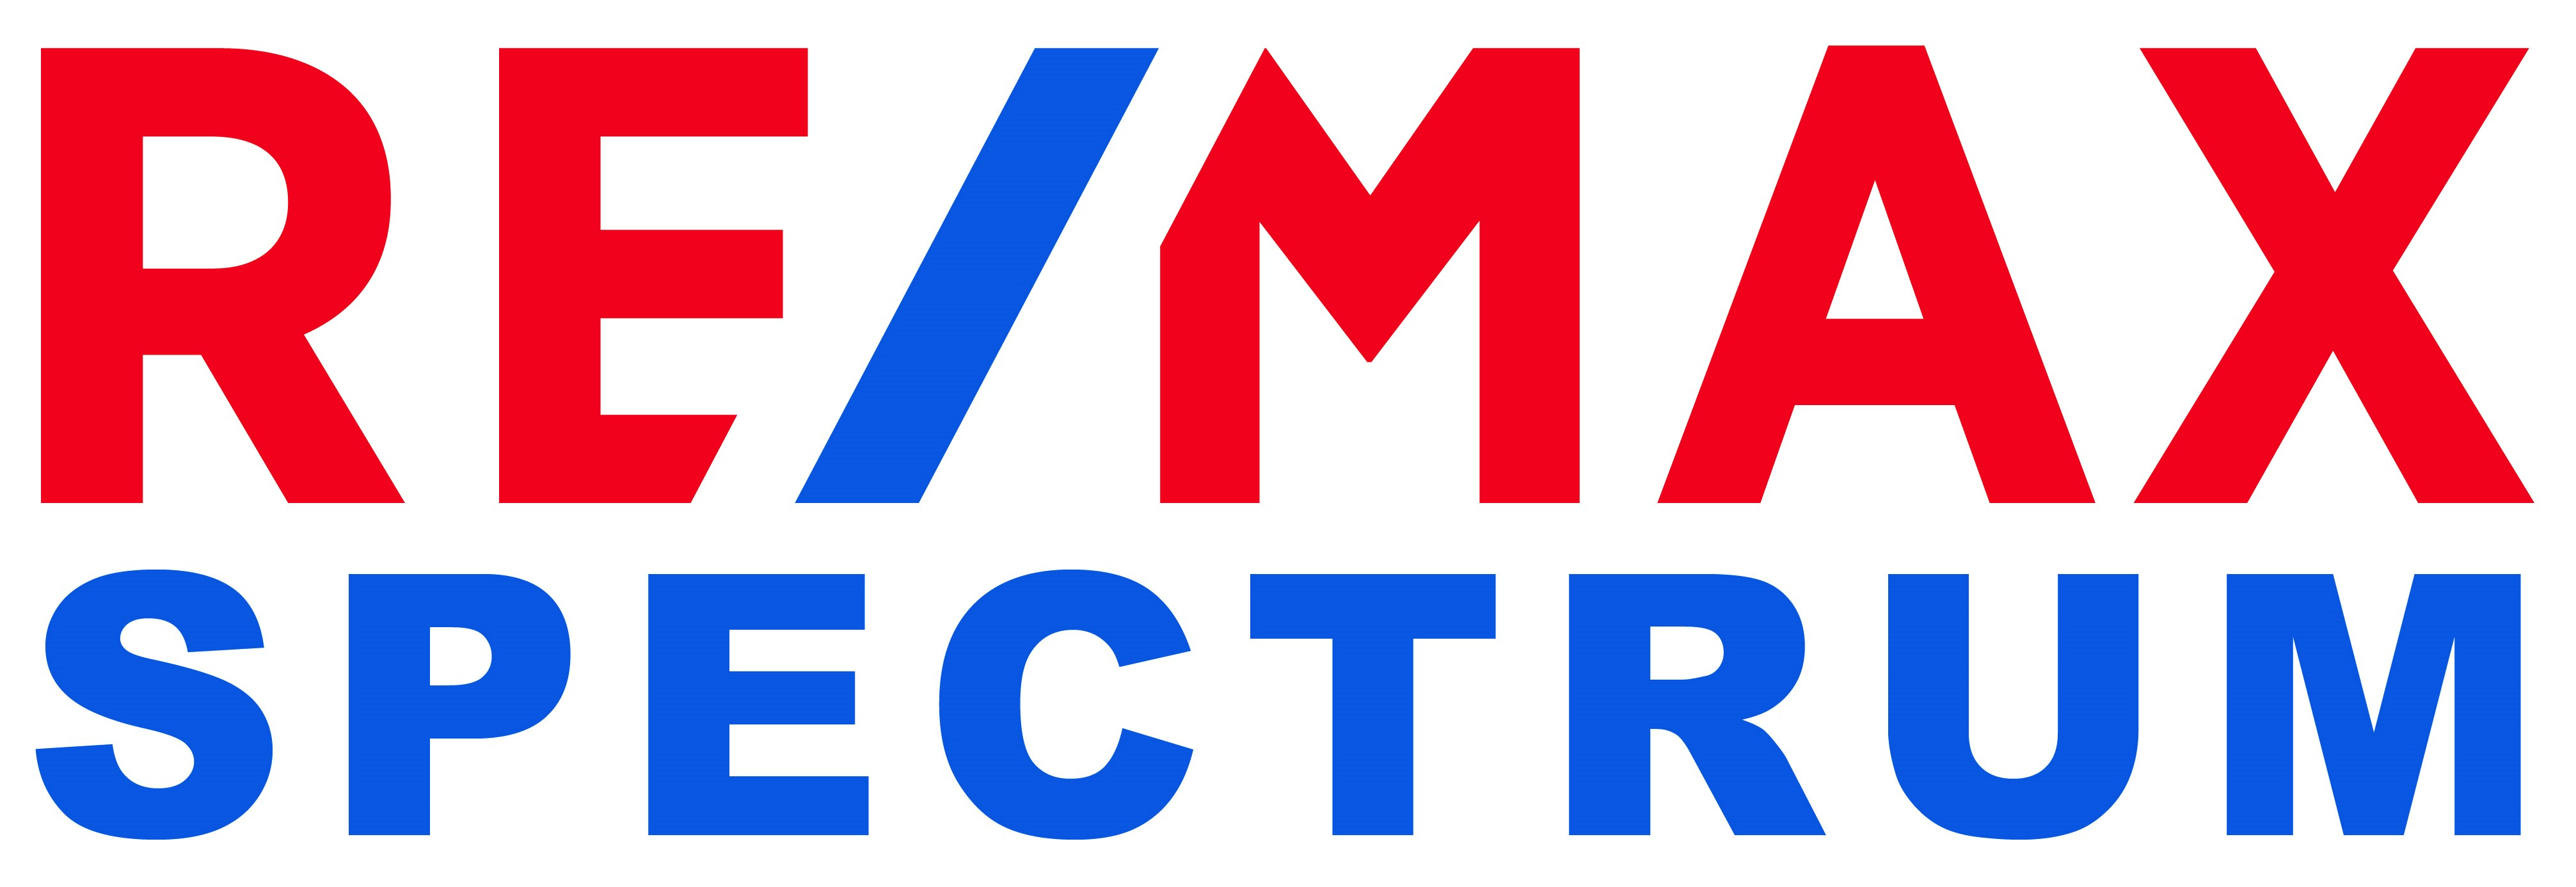 Business After Hours hosted by RE/MAX Spectrum